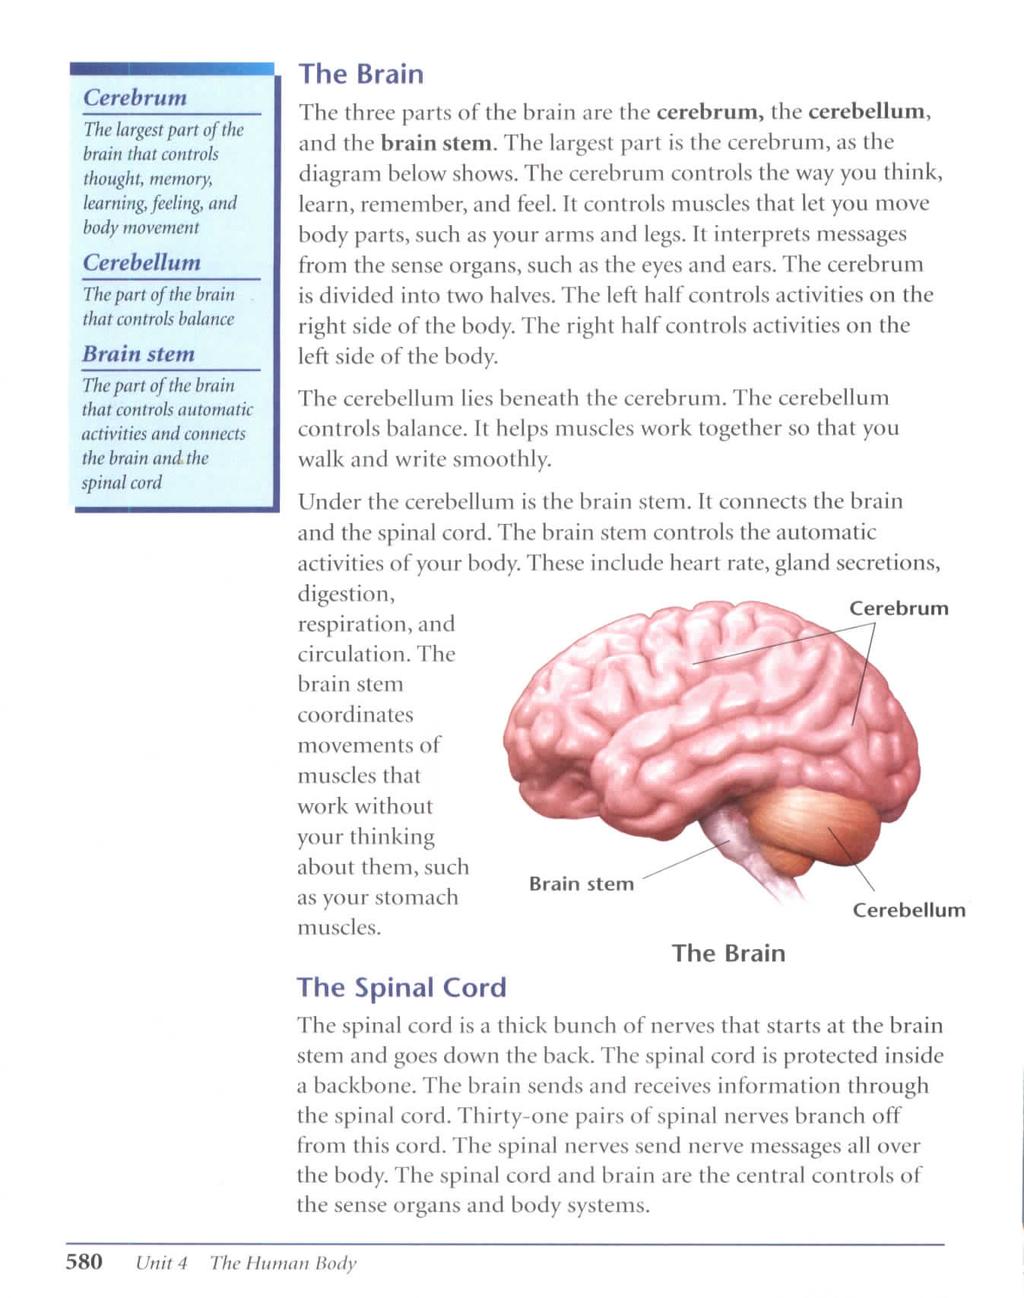 Cerebrum The largest part of the brain that controls thought, memory, learning, feeling, and body movement Cerebellum The part of the brain that controls balance Brain stem The part of the brain that